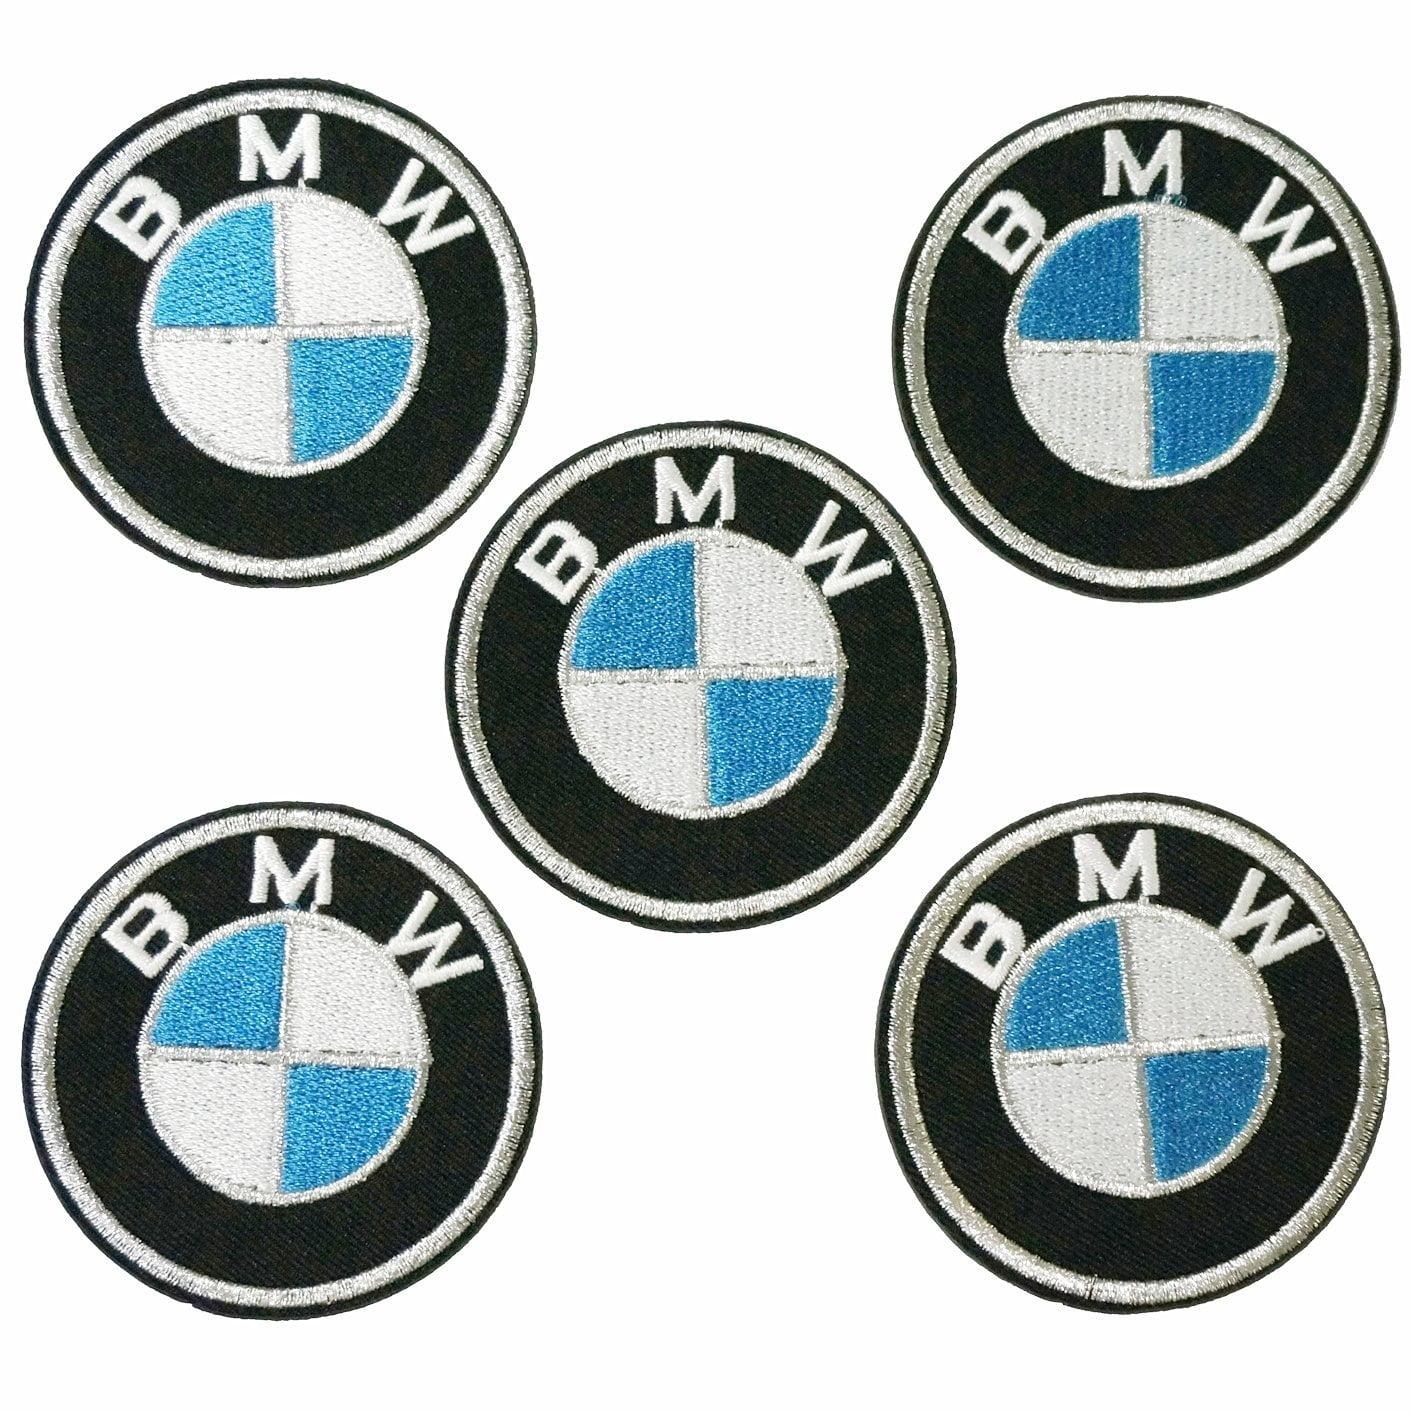 BMW Motorrad round Car Badge Iron or sew on Embroidered Patch 